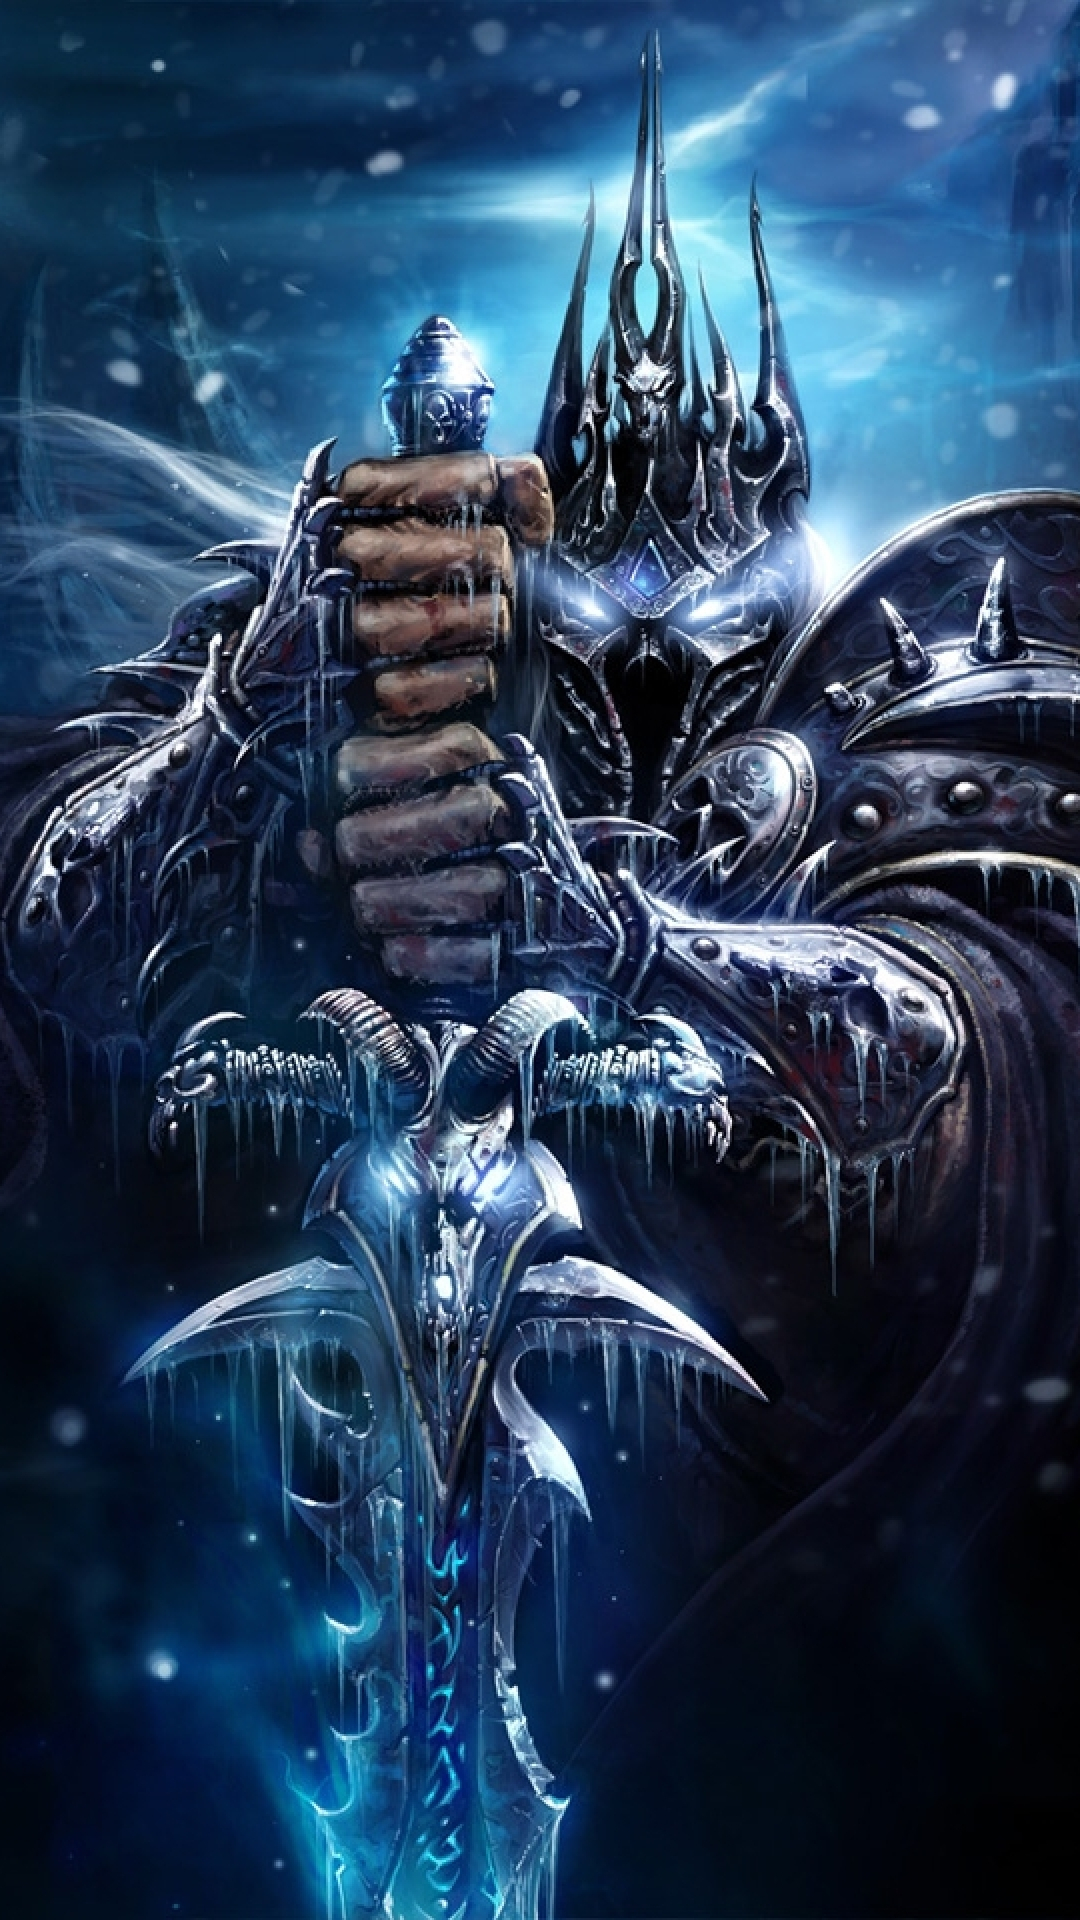 1080x1920 World Of Warcraft: Wrath Of The Lich King Phone Wallpaper Mobile Abyss